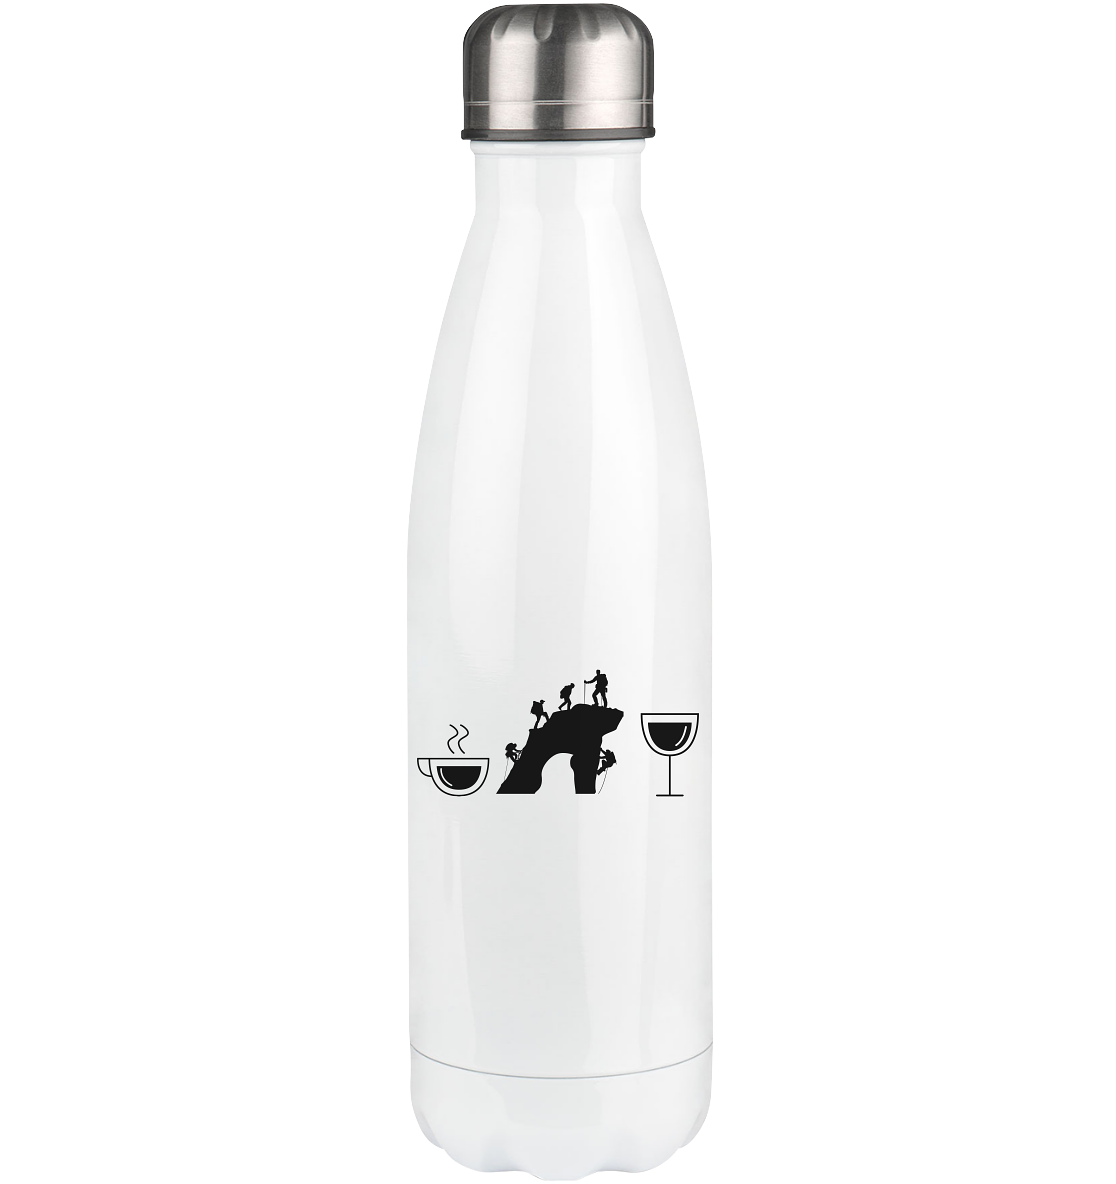 Coffee Wine and Climbing - Edelstahl Thermosflasche klettern 500ml